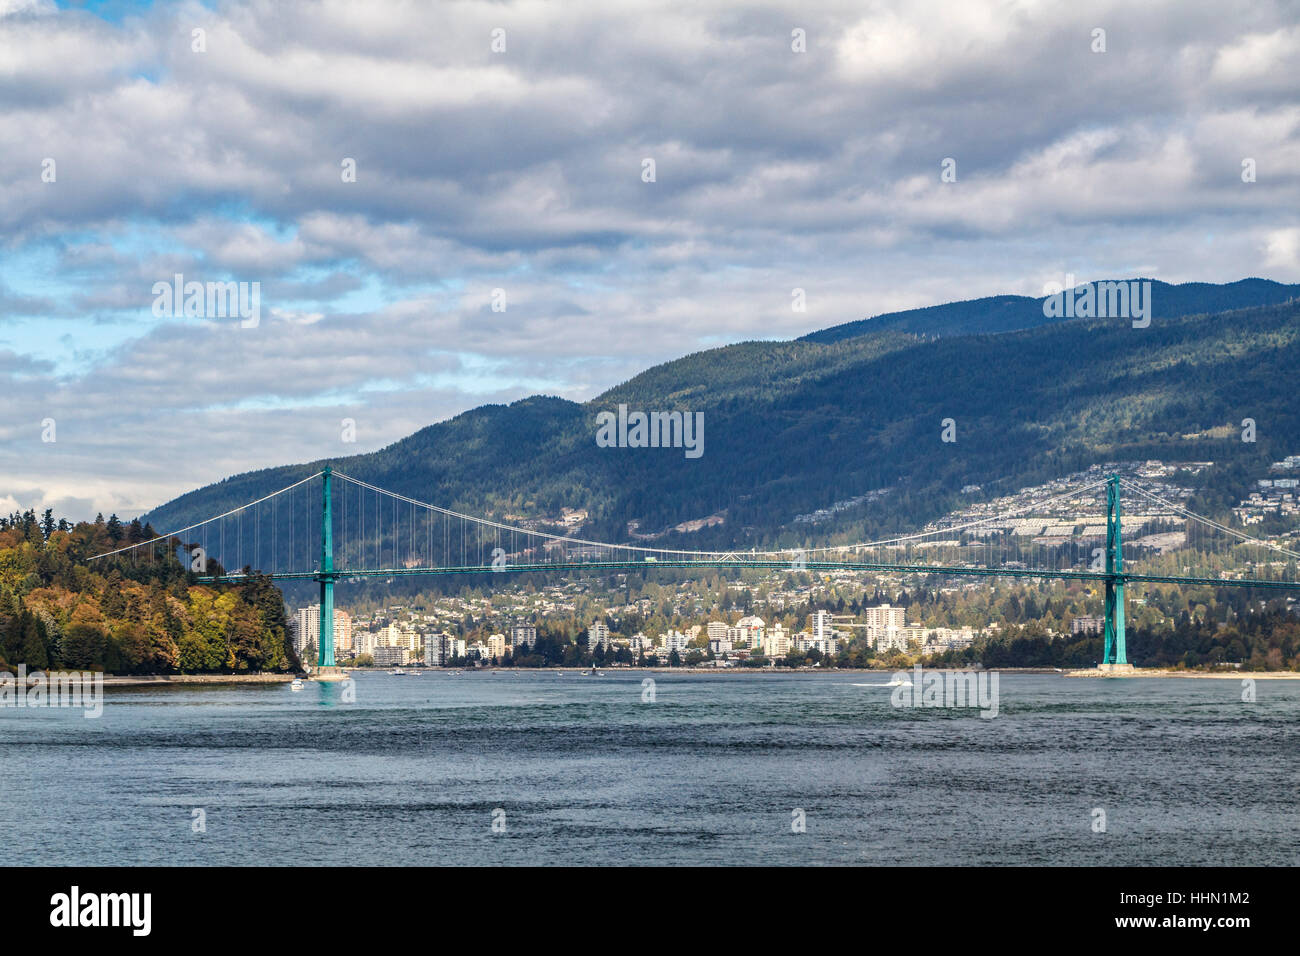 View towards the 1938 Lions Gate Bridge and North Vancouver from Stanley Park, British Columbia, Canada. Stock Photo